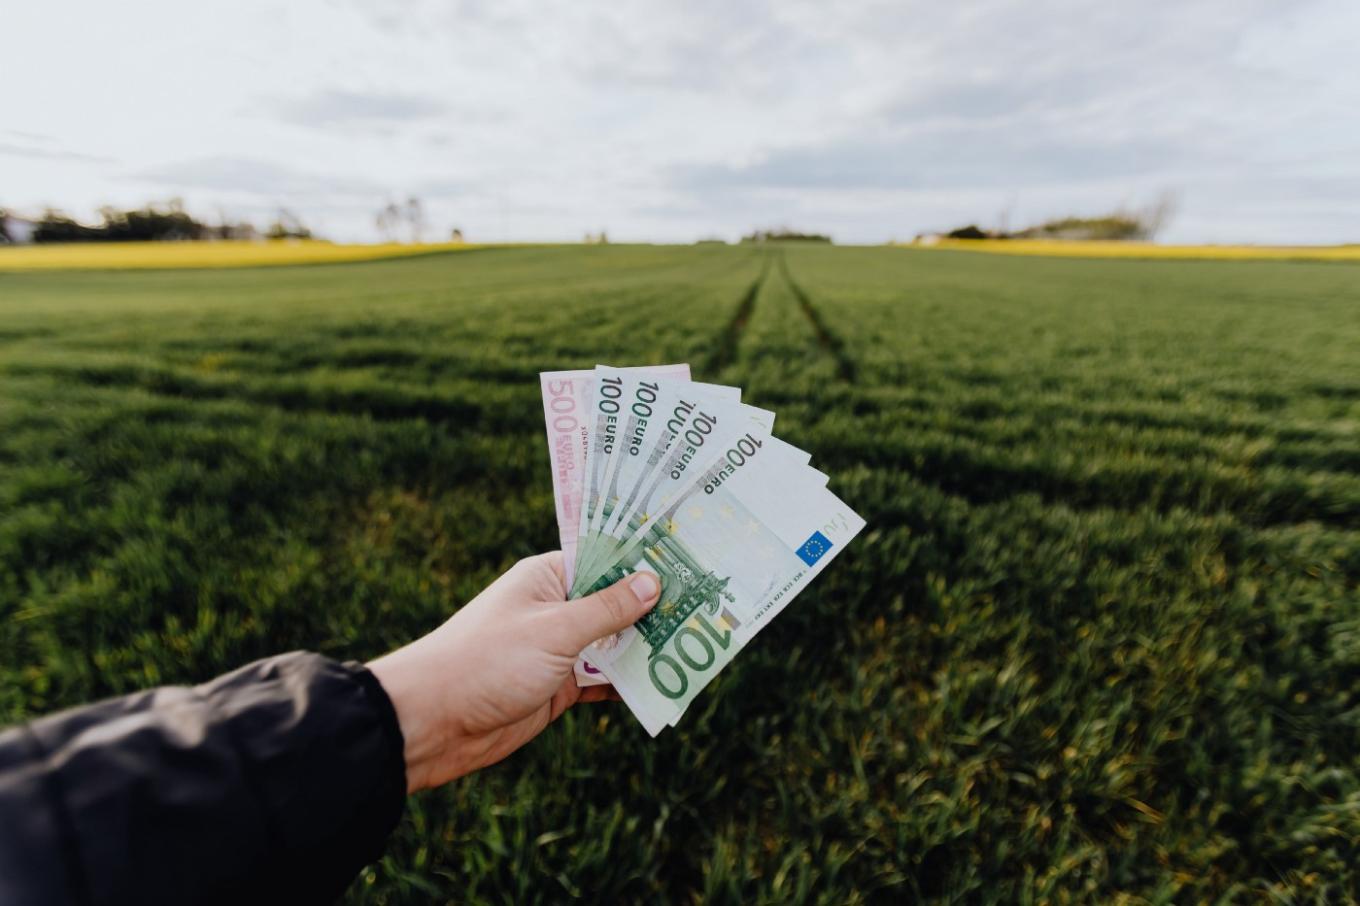 A grassy land in the background and a hand full of money in the middle of the picture.